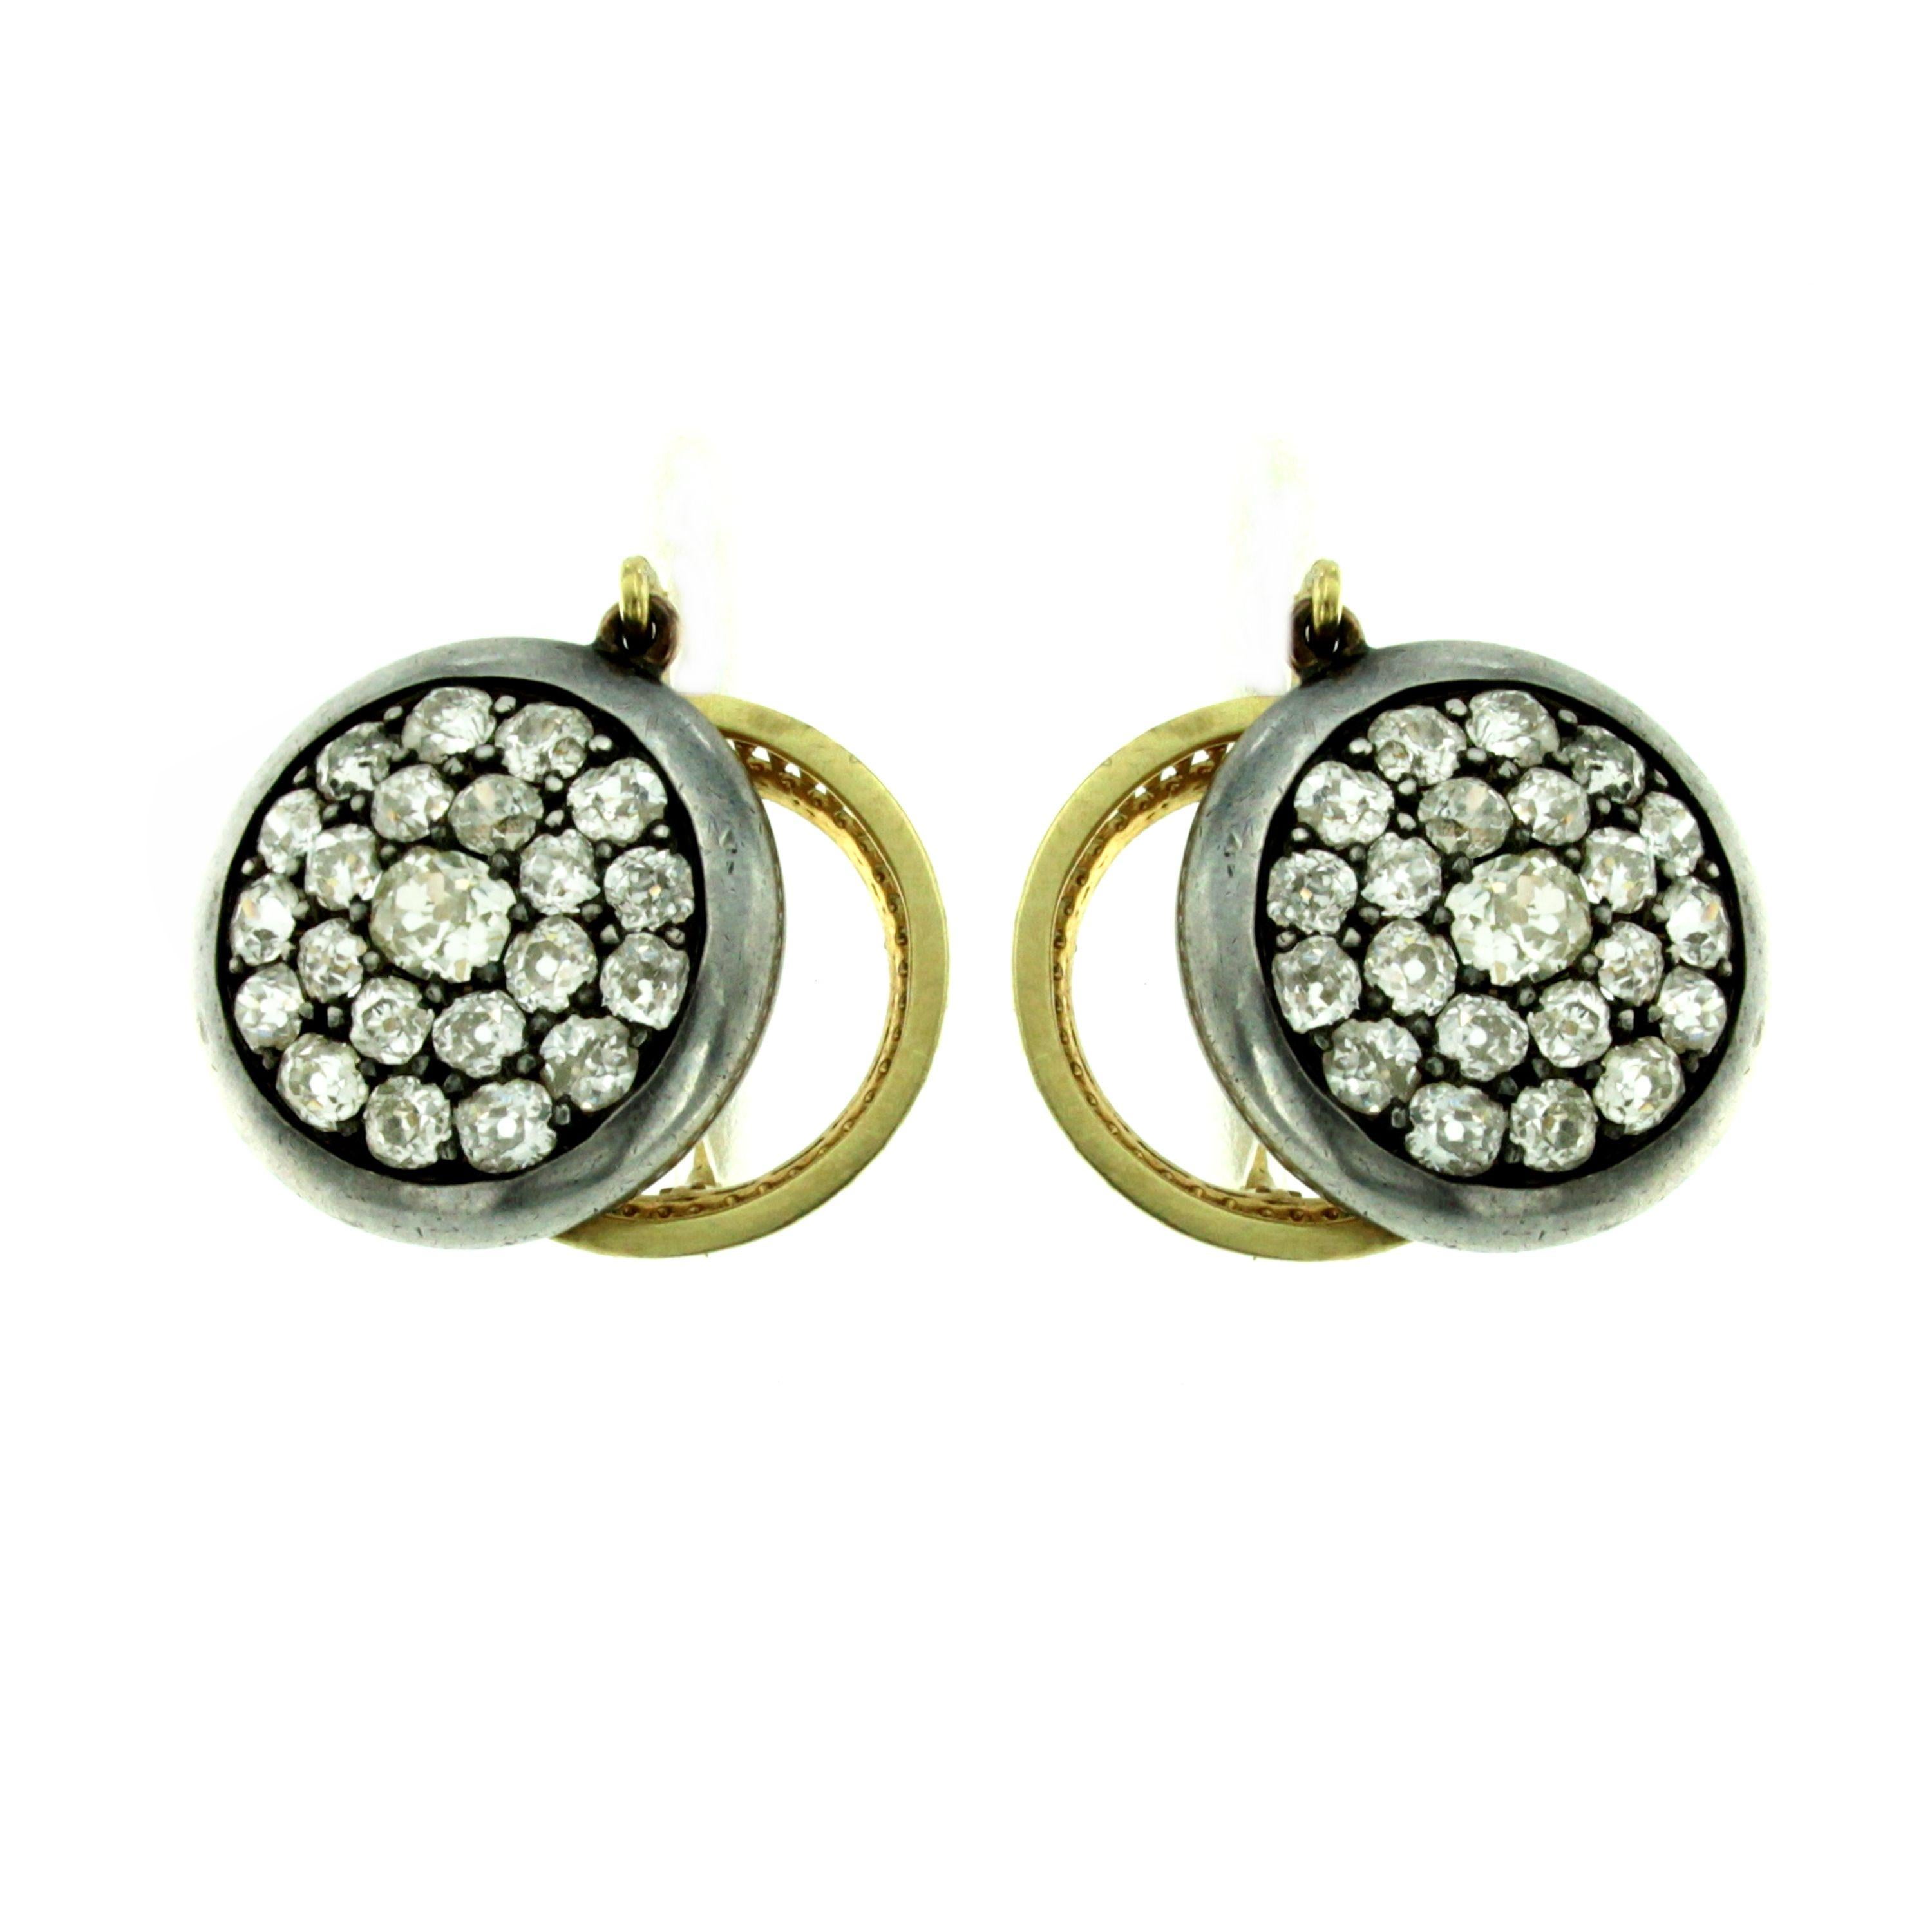 Stunning unusual antique cluster earrings, in excellent conditions.
They are hand crafted in 18k yellow gold and silver, set with 7.00 carats of Sparkling and Large Old mine cut Diamonds, graded H/I/J color Vs clarity.
The front of the earring is